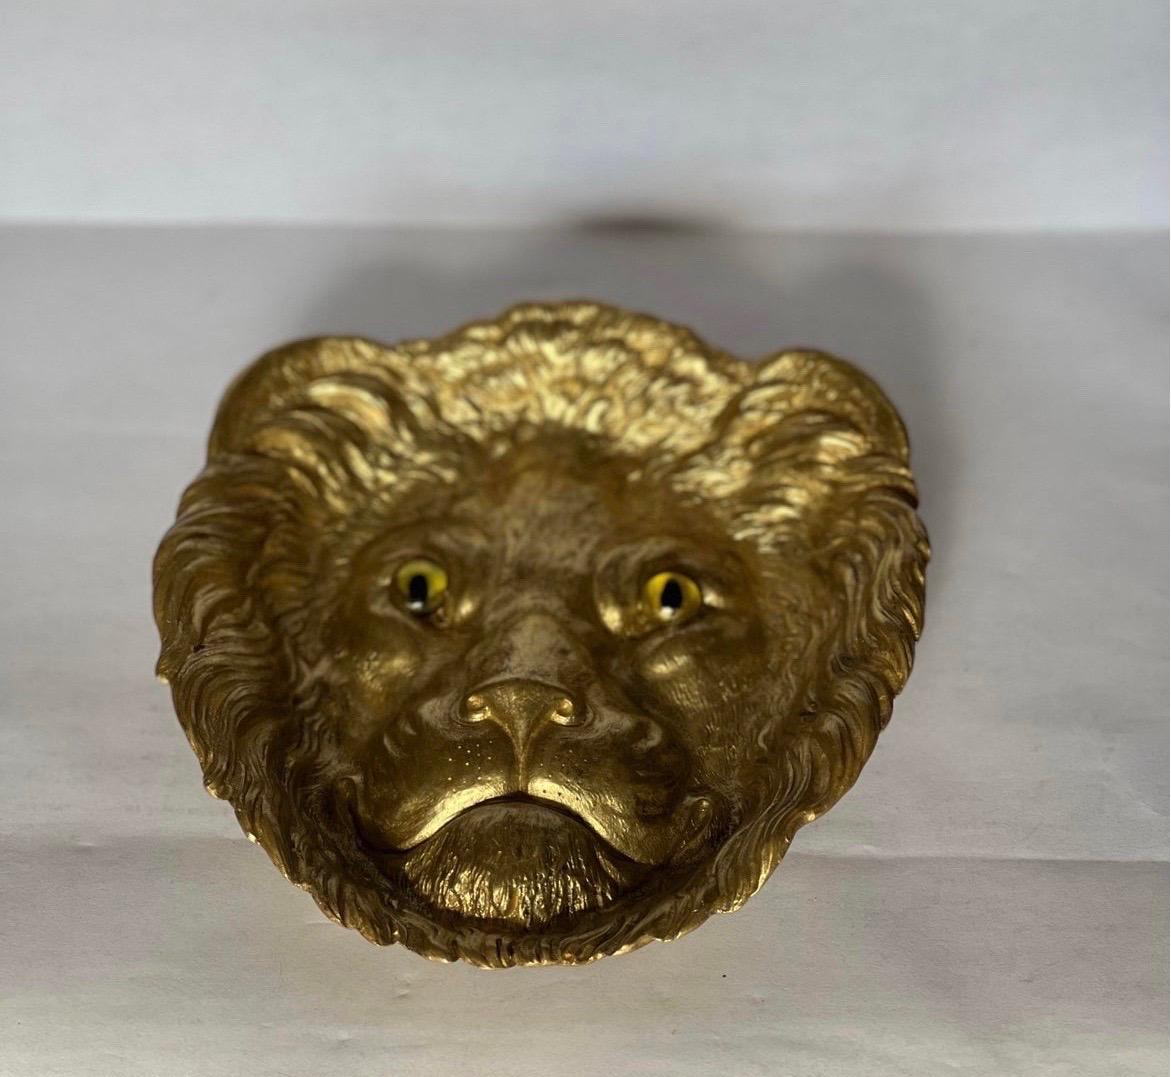 Antique French Gilt Bronze Lion Head Form Ashtray / Catchall with Glass Eyes In Good Condition For Sale In Atlanta, GA